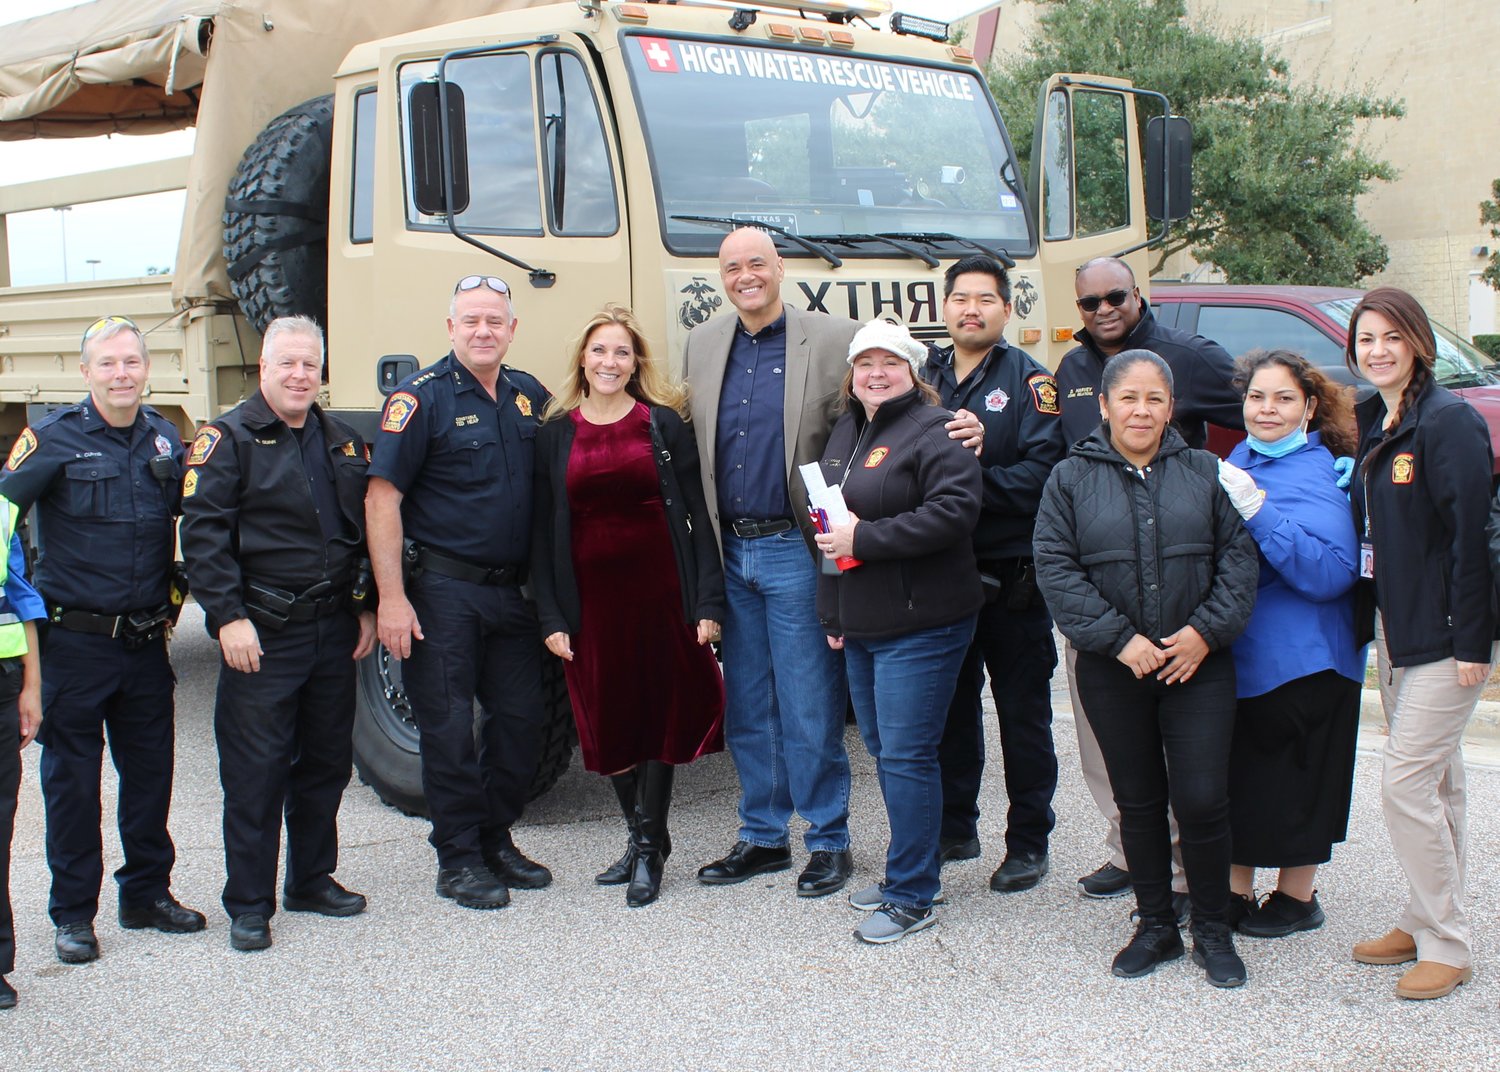 Harris County Pct. 5 Constable Ted Heap, third from left, Rosemary Jackson, fourth from left, and Aaron Jackson pose with others in front of a rescue truck the Jacksons purchased—but hope never to use—for hurricane victim rescue operations.